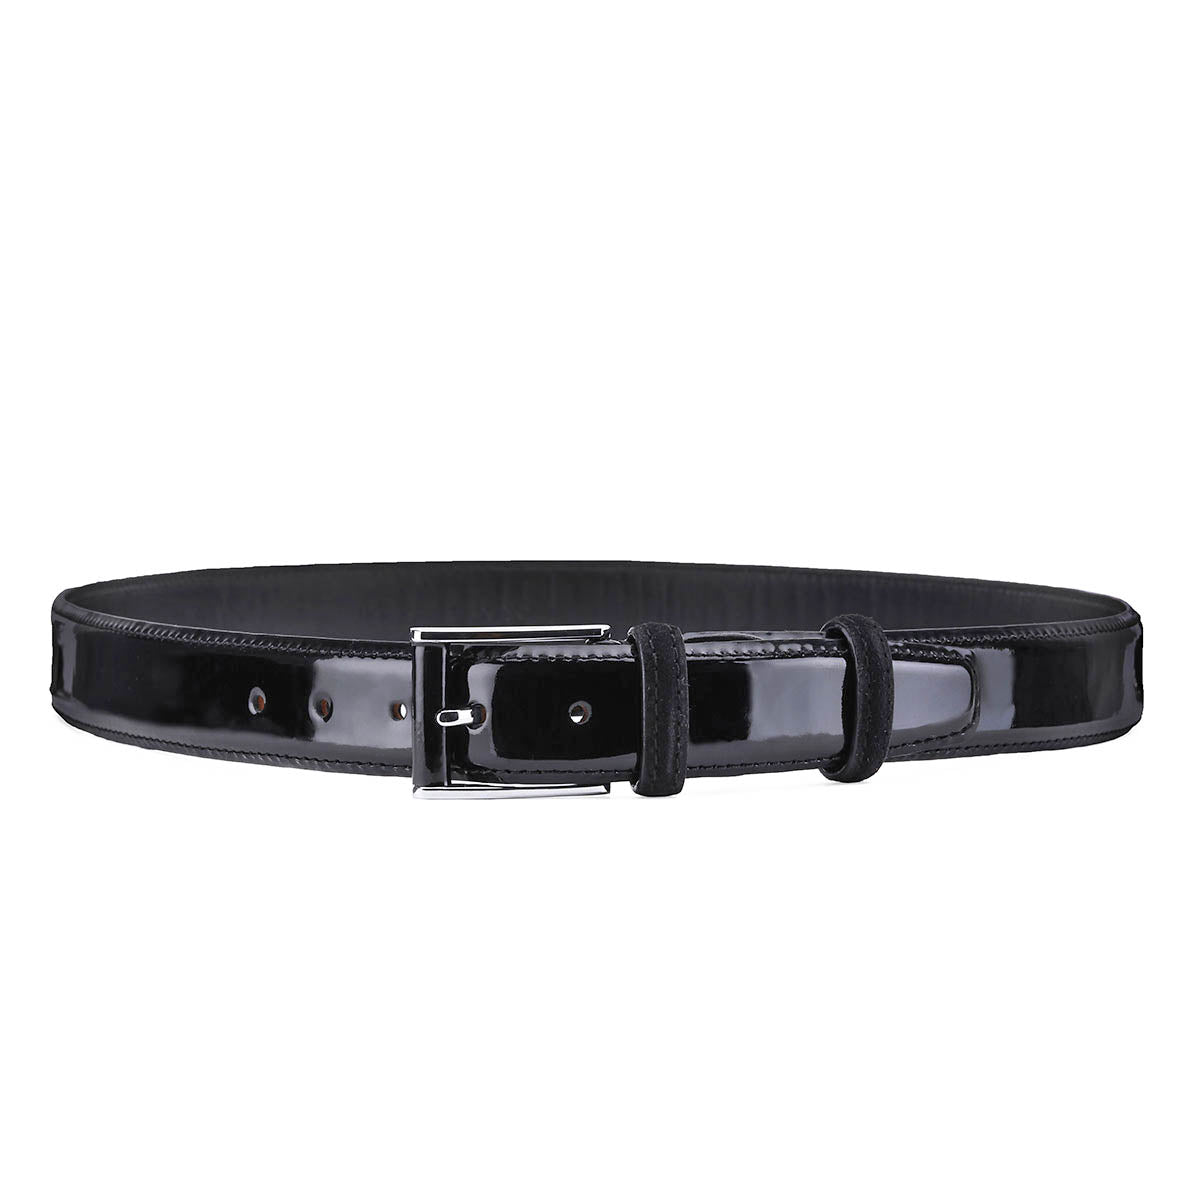 Black lacquered leather belt